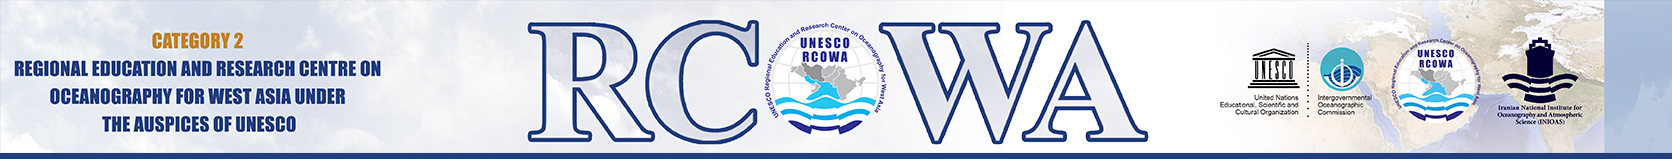 REGIONAL EDUCATION AND RESEARCH CENTRE ON OCEANOGRAPHY FOR WEST ASIA UNDER THE AUSPICES OF UNESCO